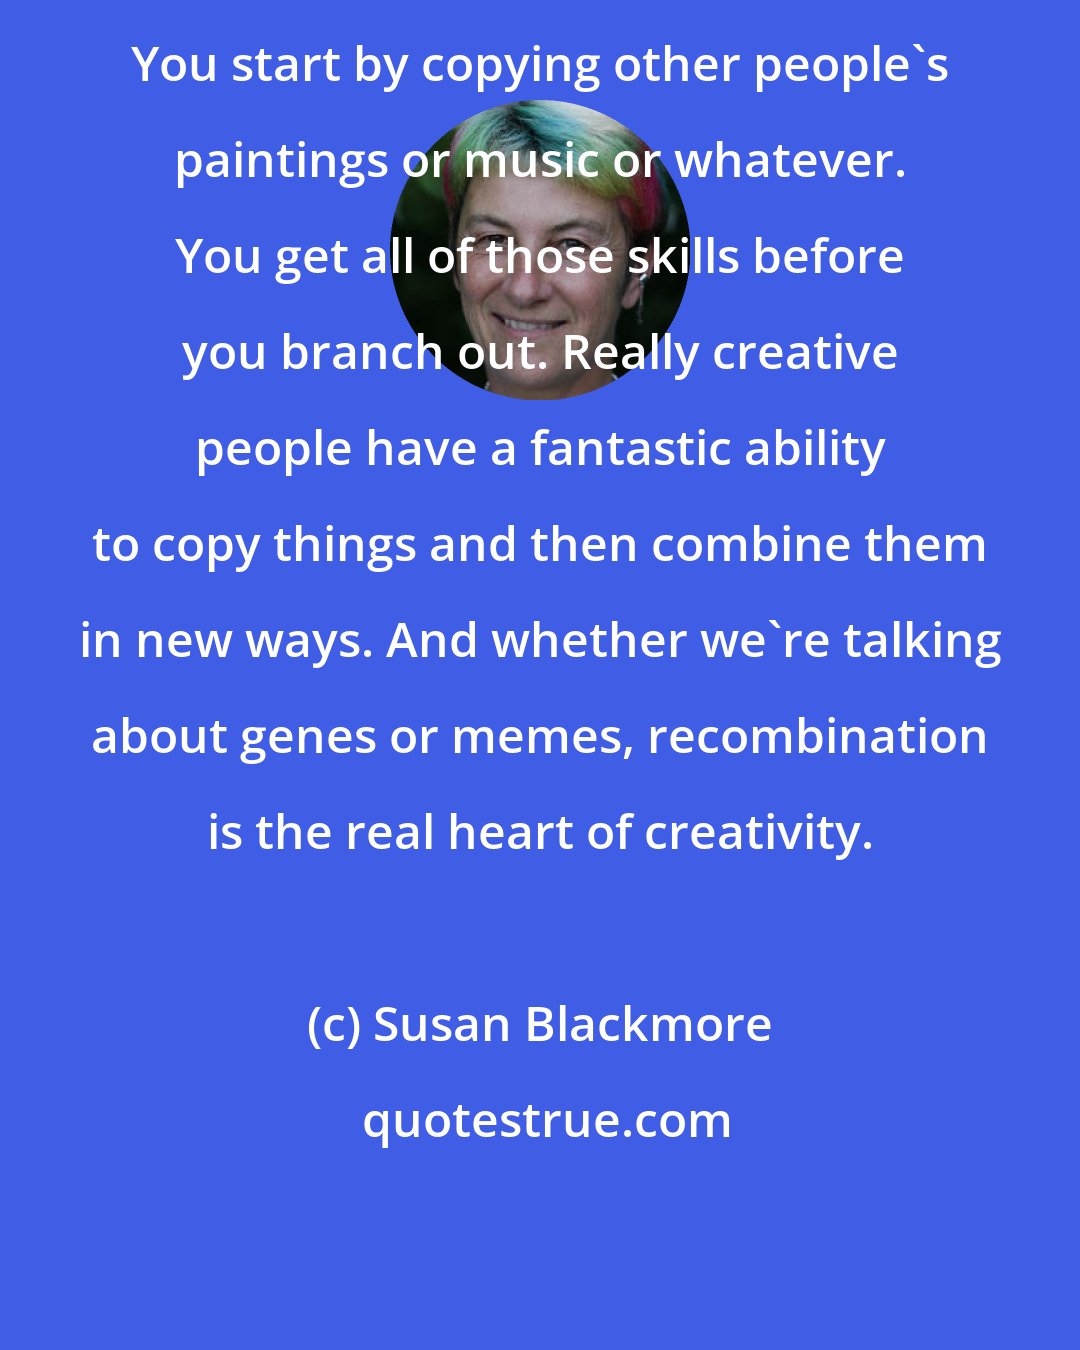 Susan Blackmore: You start by copying other people's paintings or music or whatever. You get all of those skills before you branch out. Really creative people have a fantastic ability to copy things and then combine them in new ways. And whether we're talking about genes or memes, recombination is the real heart of creativity.